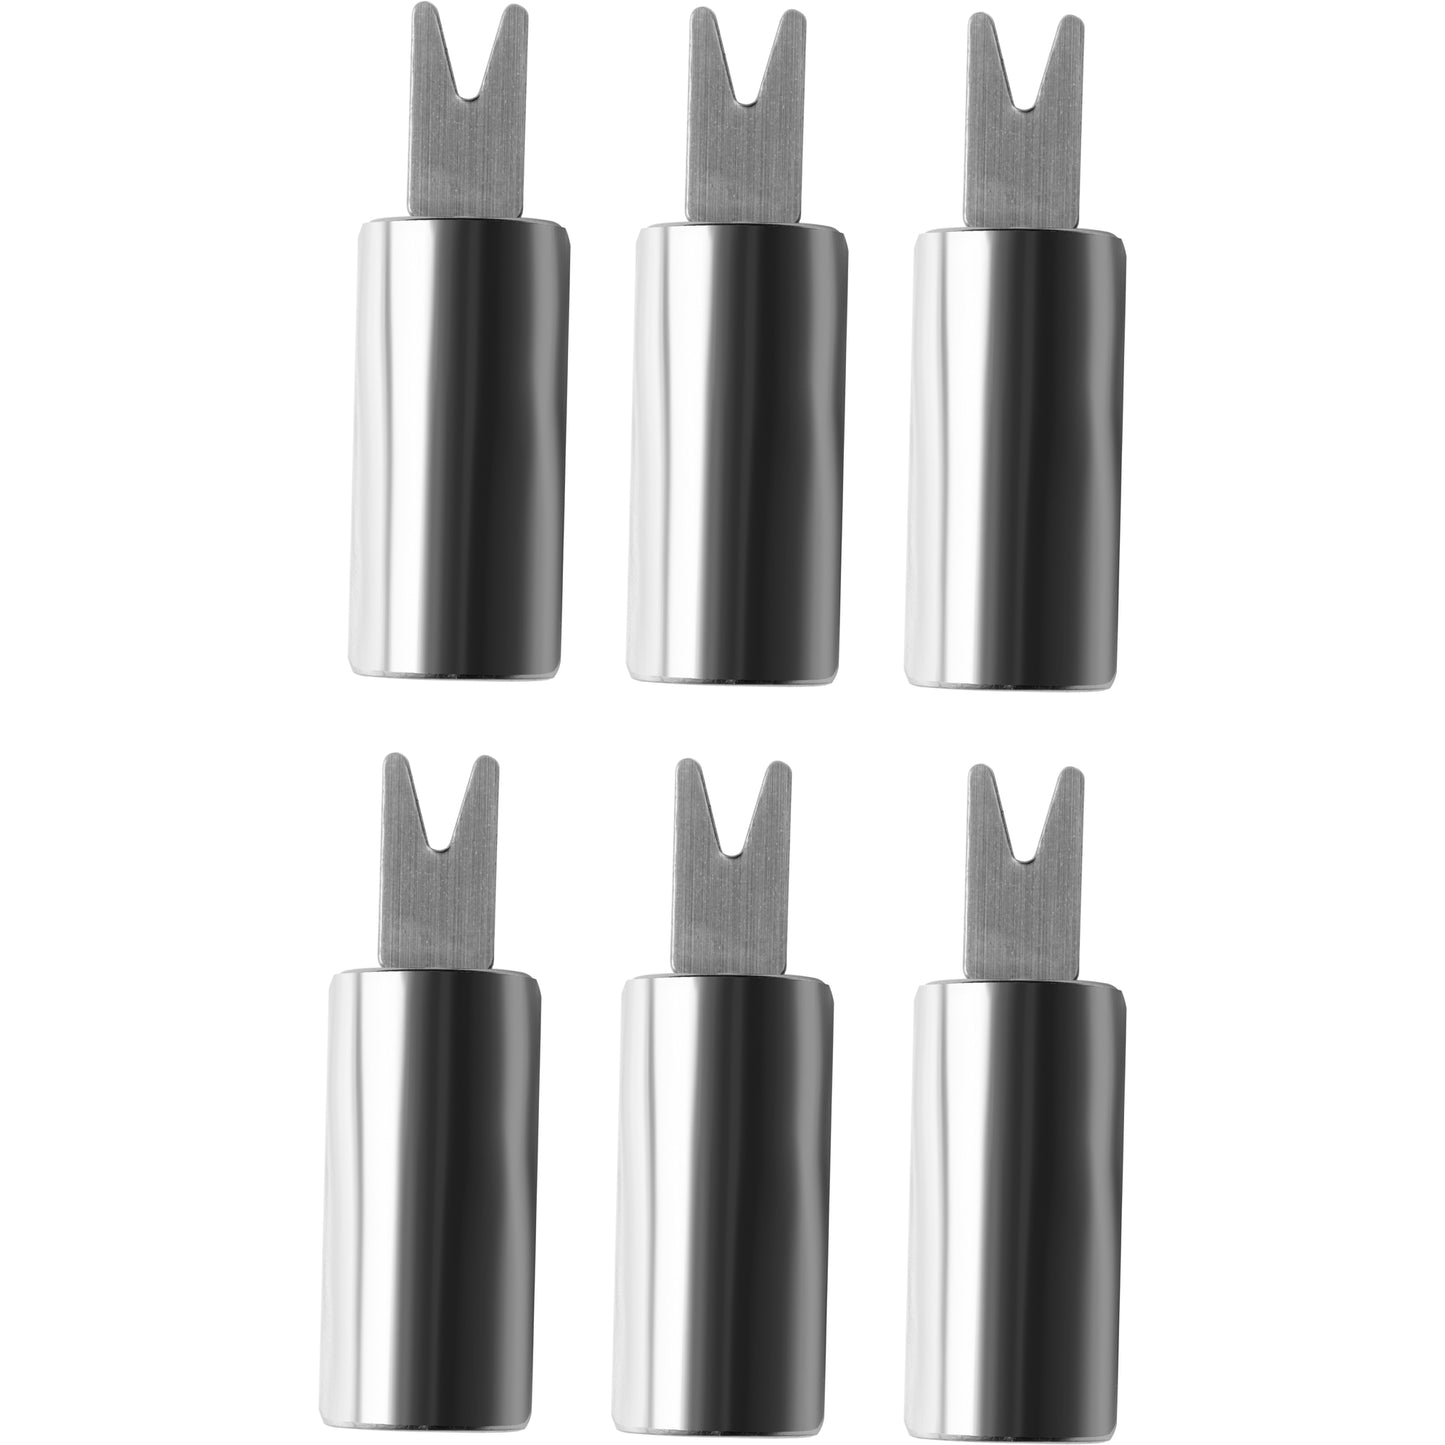 North Point® stainless steel 6 Corn Holders.